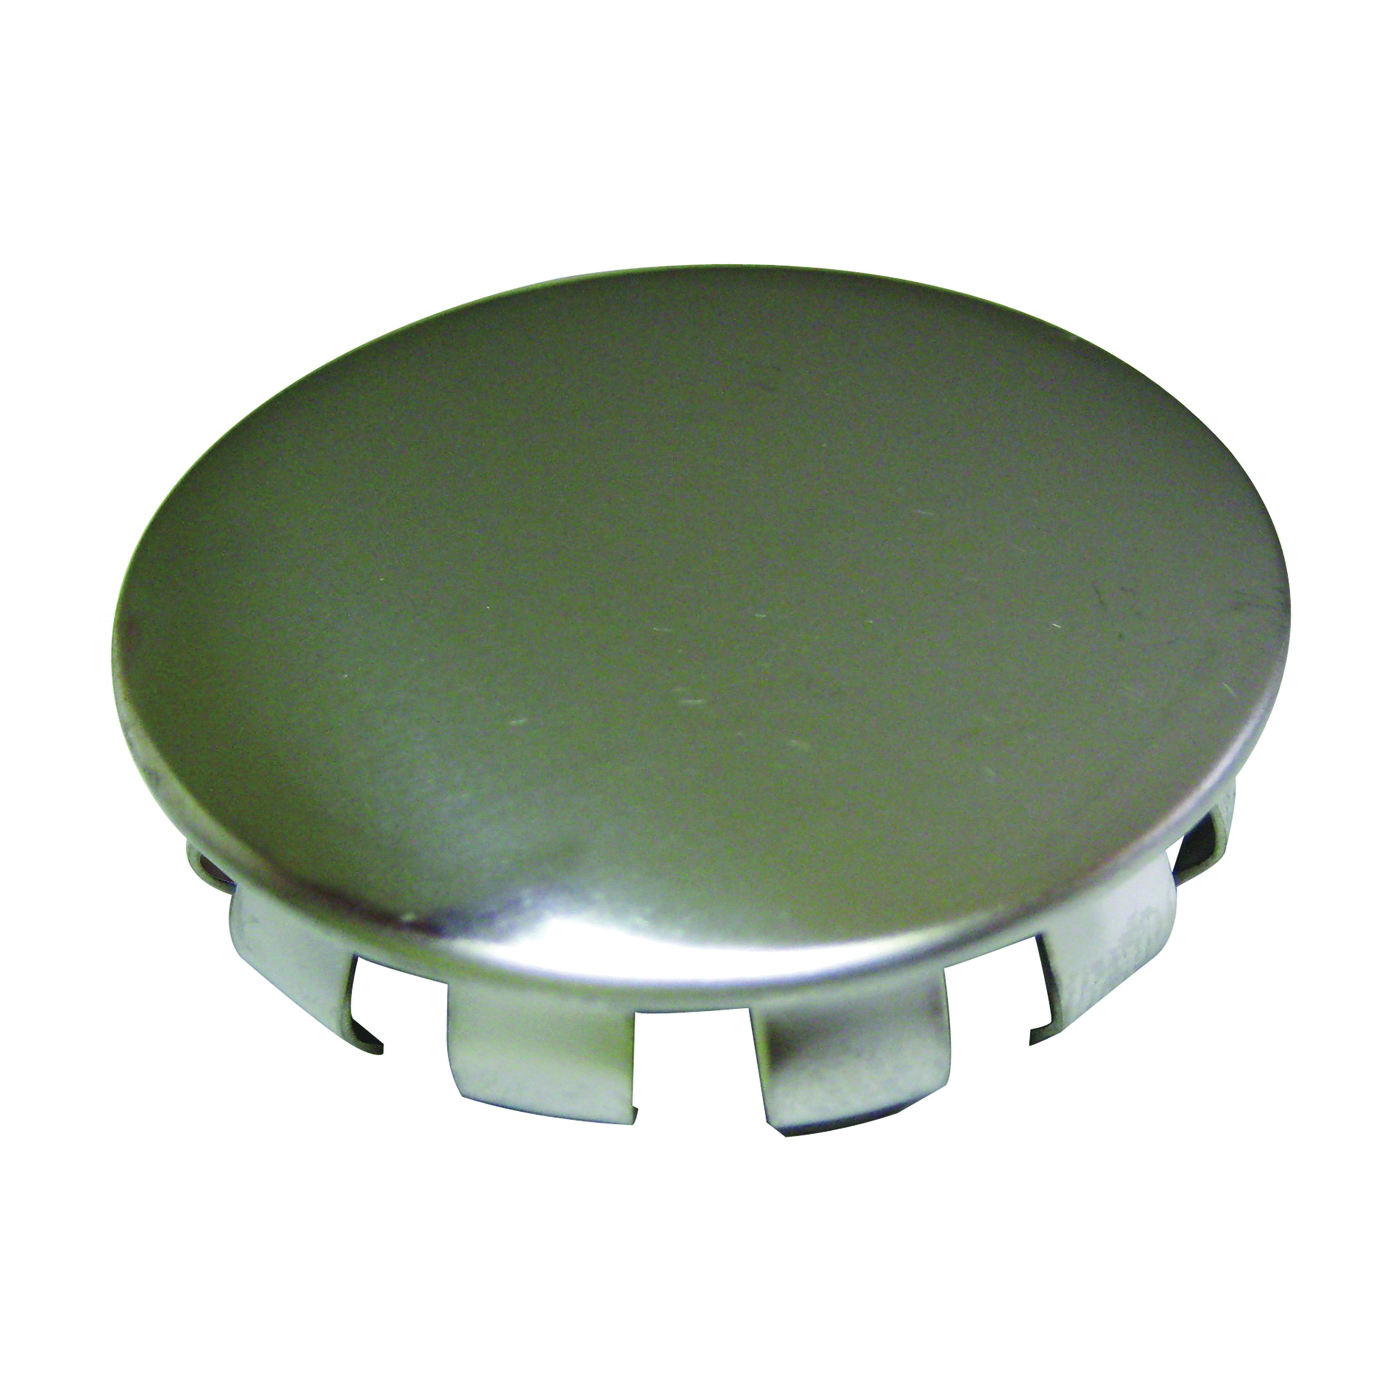 PP21511 Faucet Hole Cover, Snap-In, Stainless Steel, For: Sink and Faucets